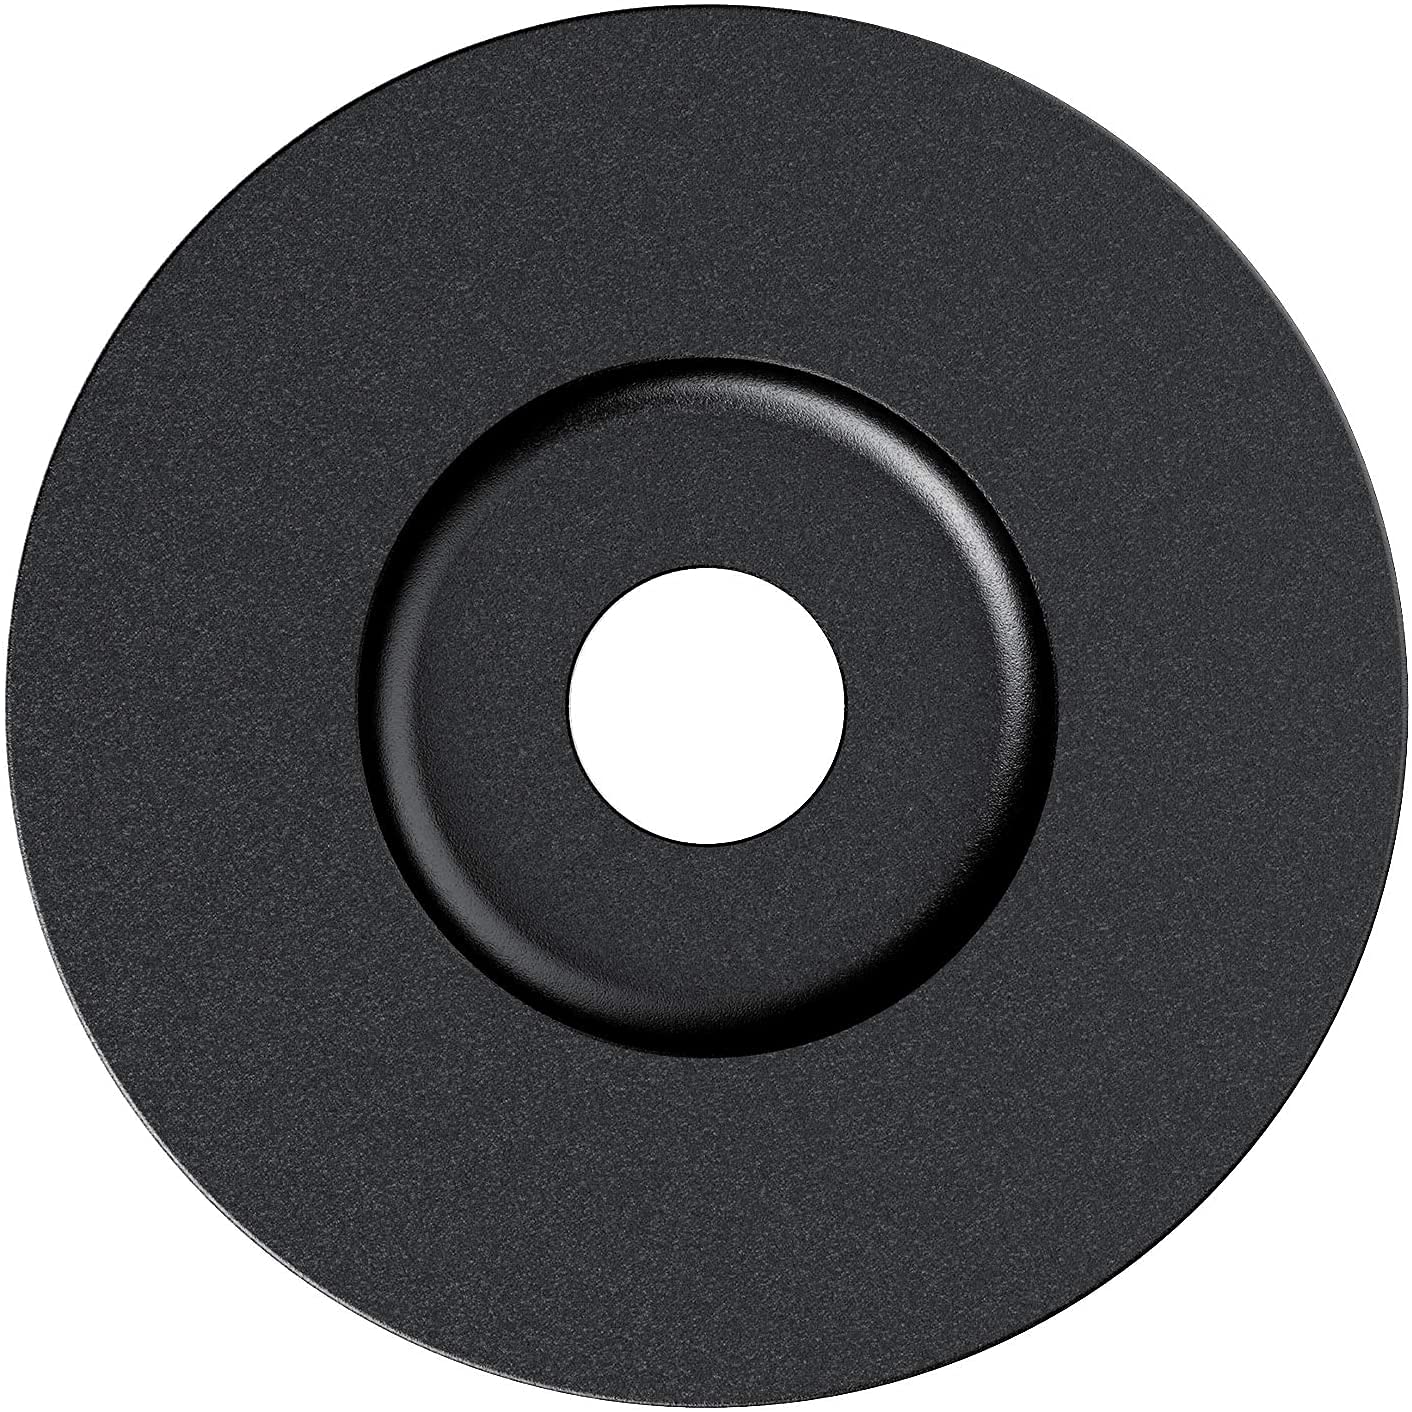 45 RPM Adapter, 7 Inch Vinyl Record Durable Solid Aluminum Dome 45 Adapter for Vinyl Record Player Turntables (Black)